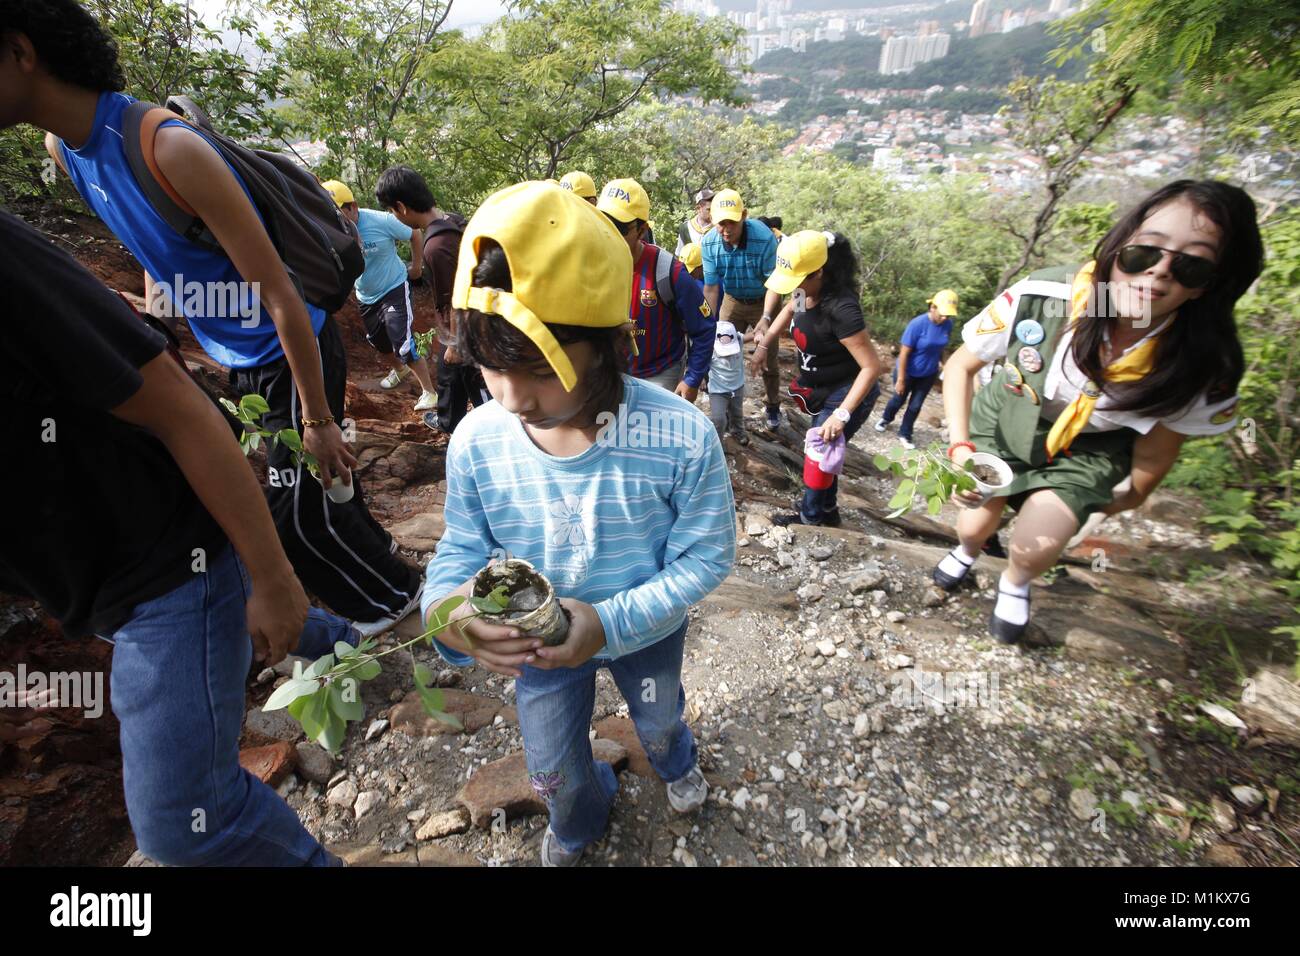 May 27, 2012 - Valencia, Carabobo, Venezuela - June 04, 2012. A child participates with his mother in a reforestation campaign of the Casupo hill with trees sprouted in the nursery. Fernando Pe''“alver Park, founded in 1983, has 22 hectares for environmental recreation that promote the relationship between man and nature, is crossed by the river Cabriales, there are diverse ecosystems, and there is a great variety of flora and fauna species. The park depends on the state government of Carabobo, which minimizes maintenance costs through a nursery, as a sustainable development project in harmony Stock Photo